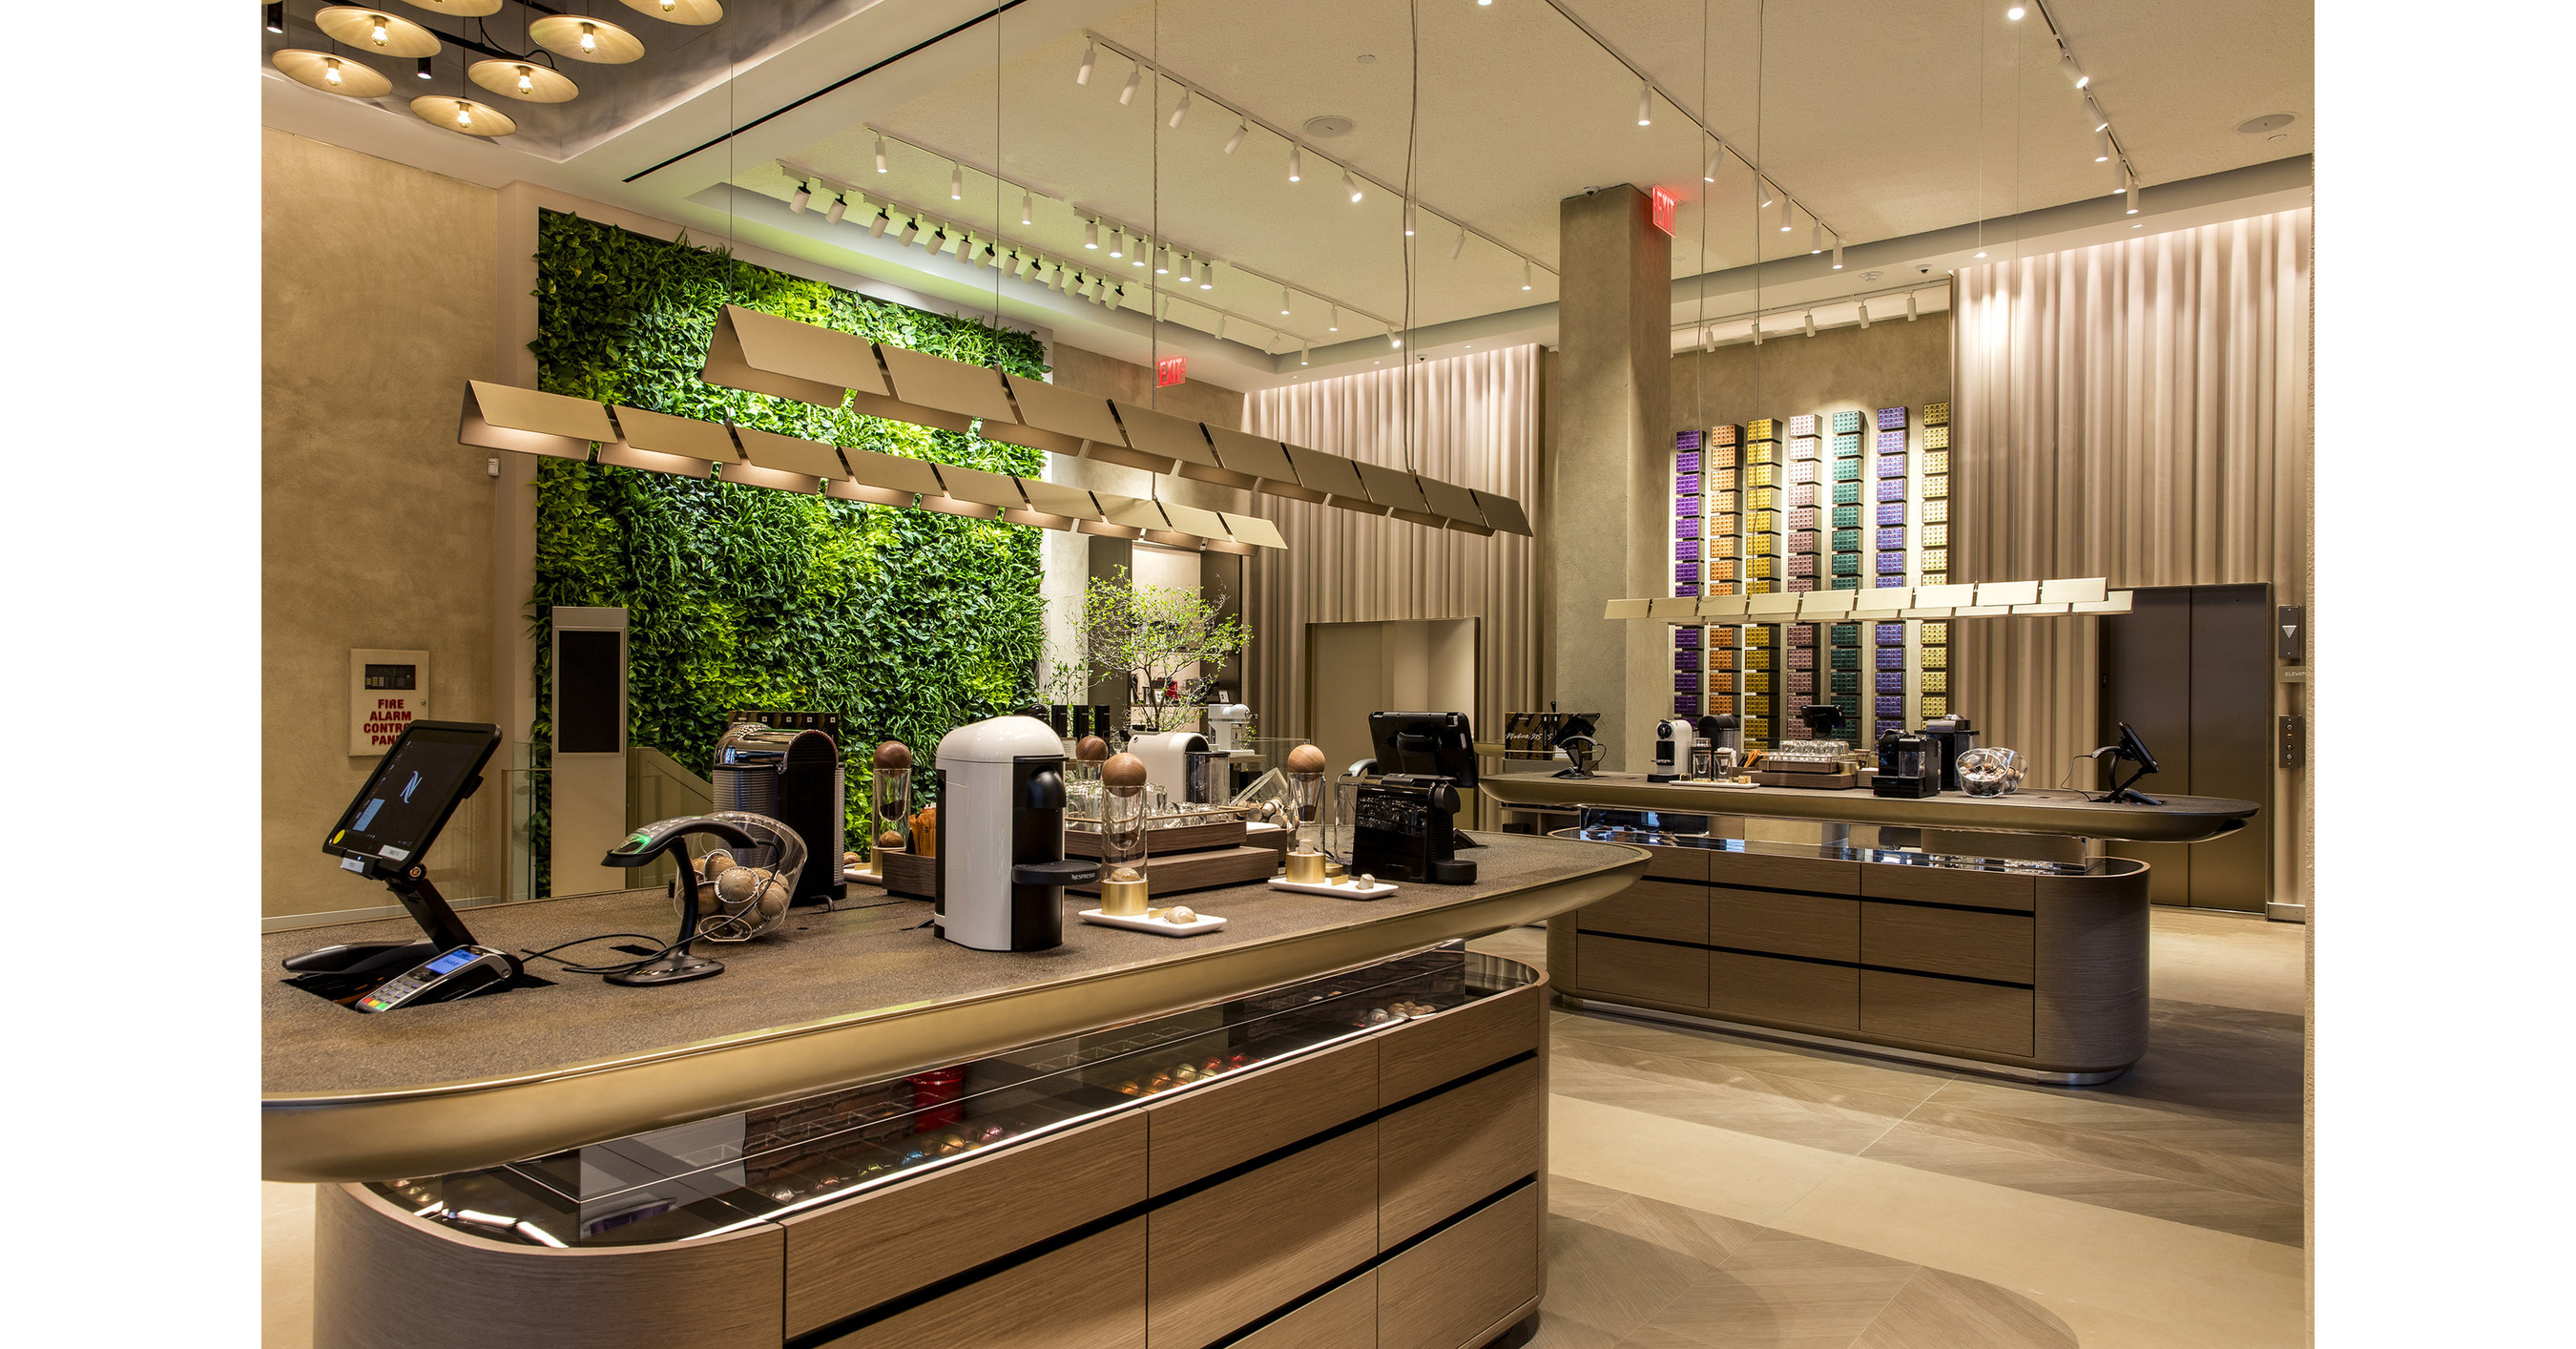 Nespresso Premieres Boutique Concept In The U.S. To Immerse Visitors In The Ultimate Coffee Experience And Commitment To Sustainability